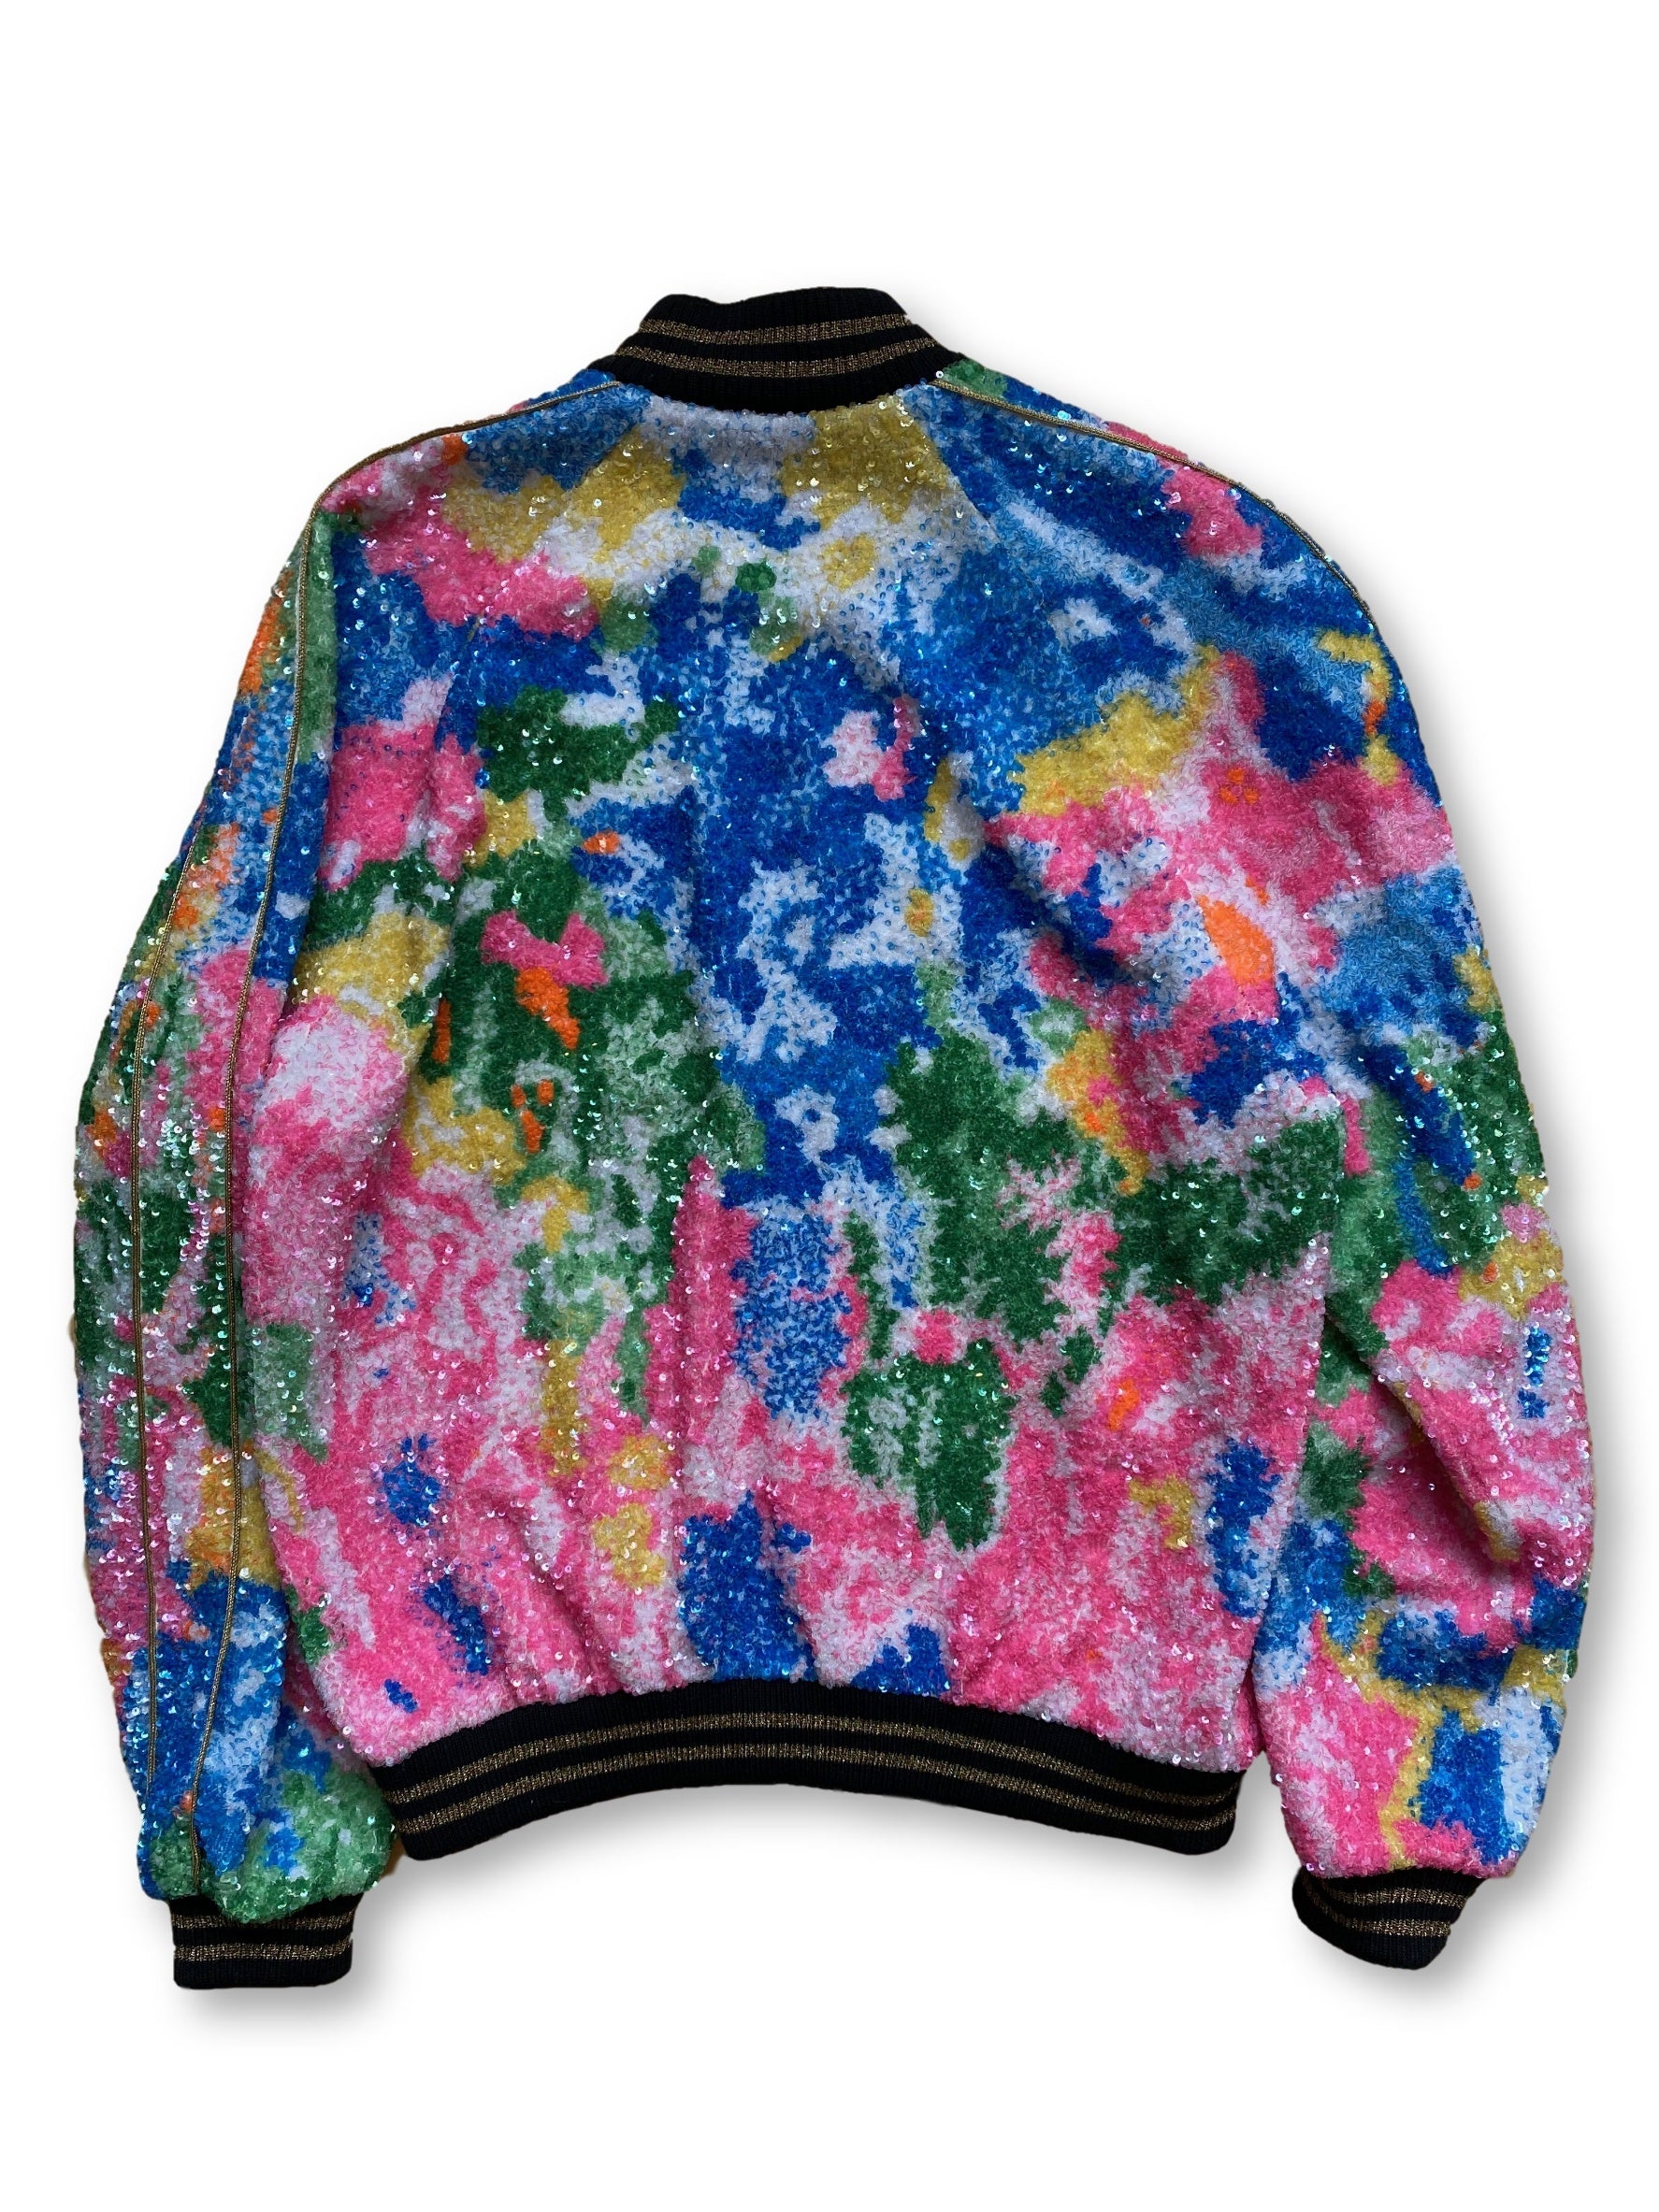 SS16 Embroidered Tie Dye Teddy Jacket